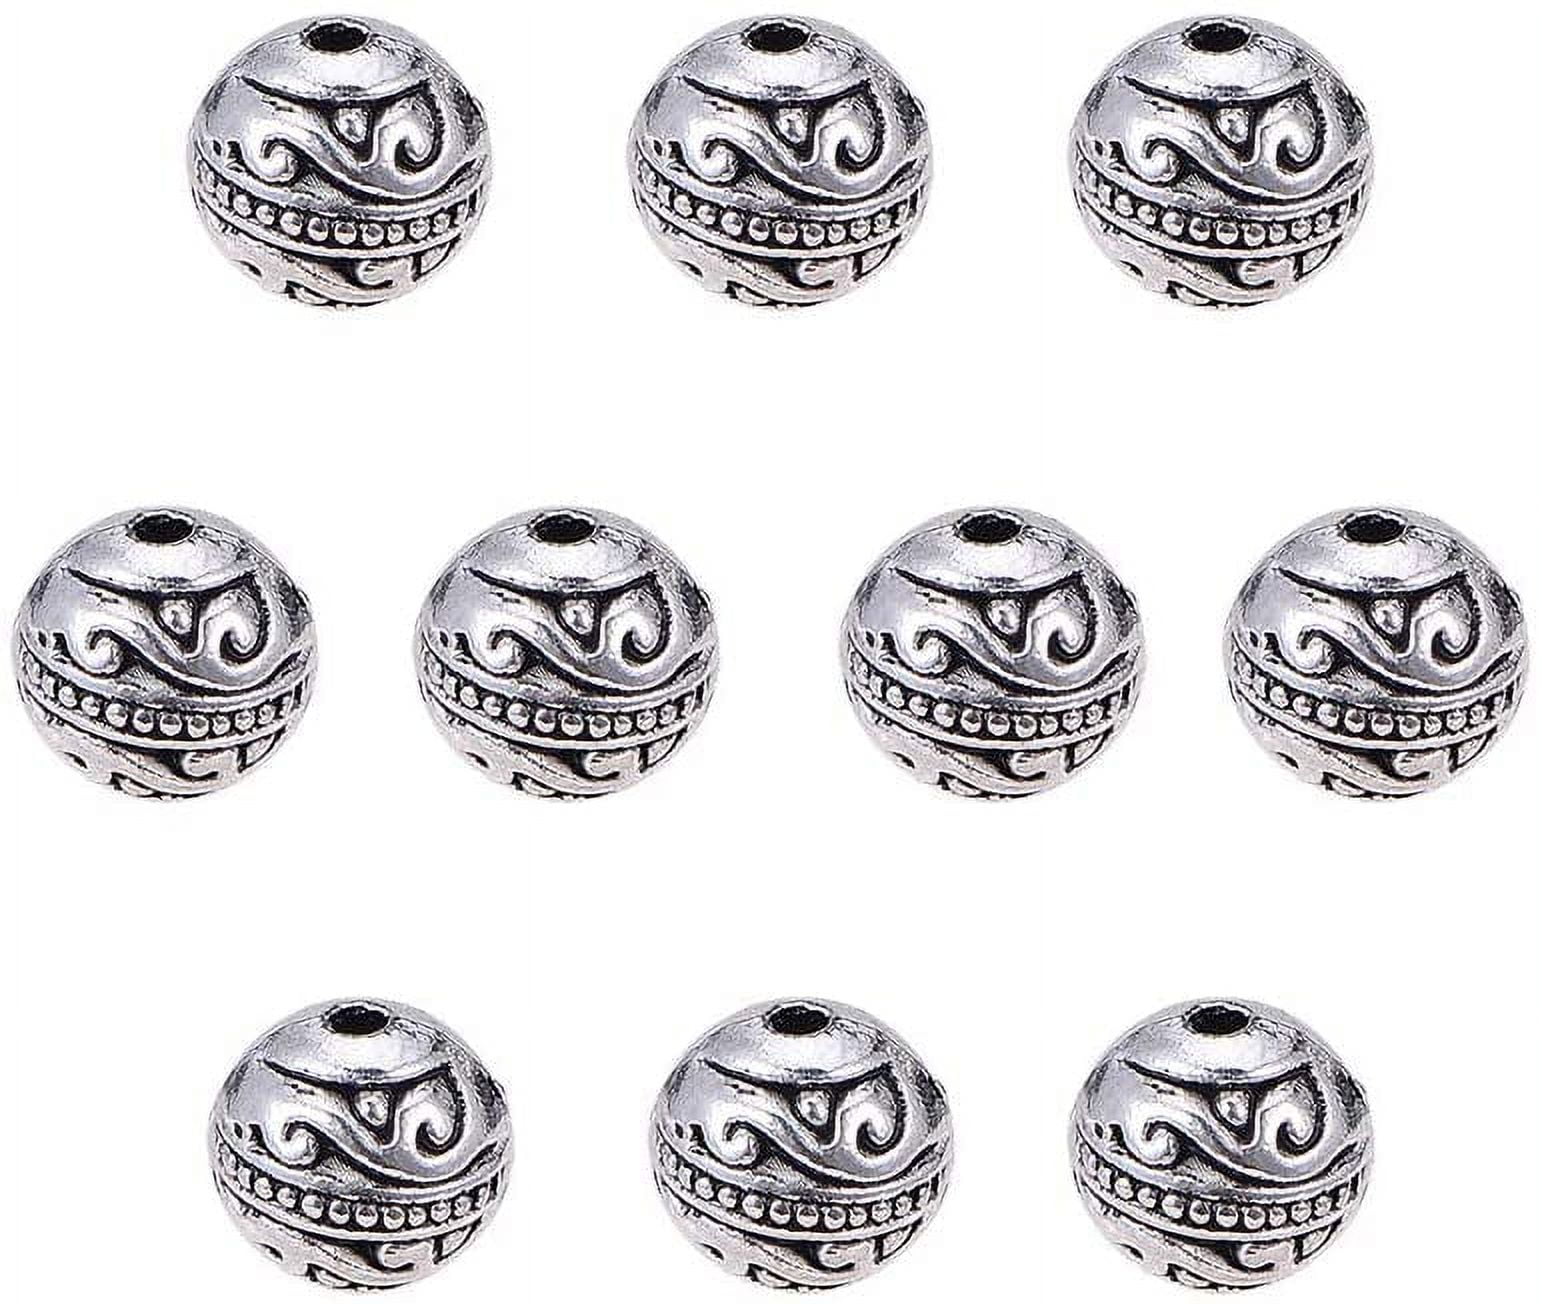 Plantina Plated Coler Brass Pewter Metal Spacer Beads Large 8mm Round Hole  For Jewelry Making ID 26990 By Boodsnice From Beadsnice, $3.01